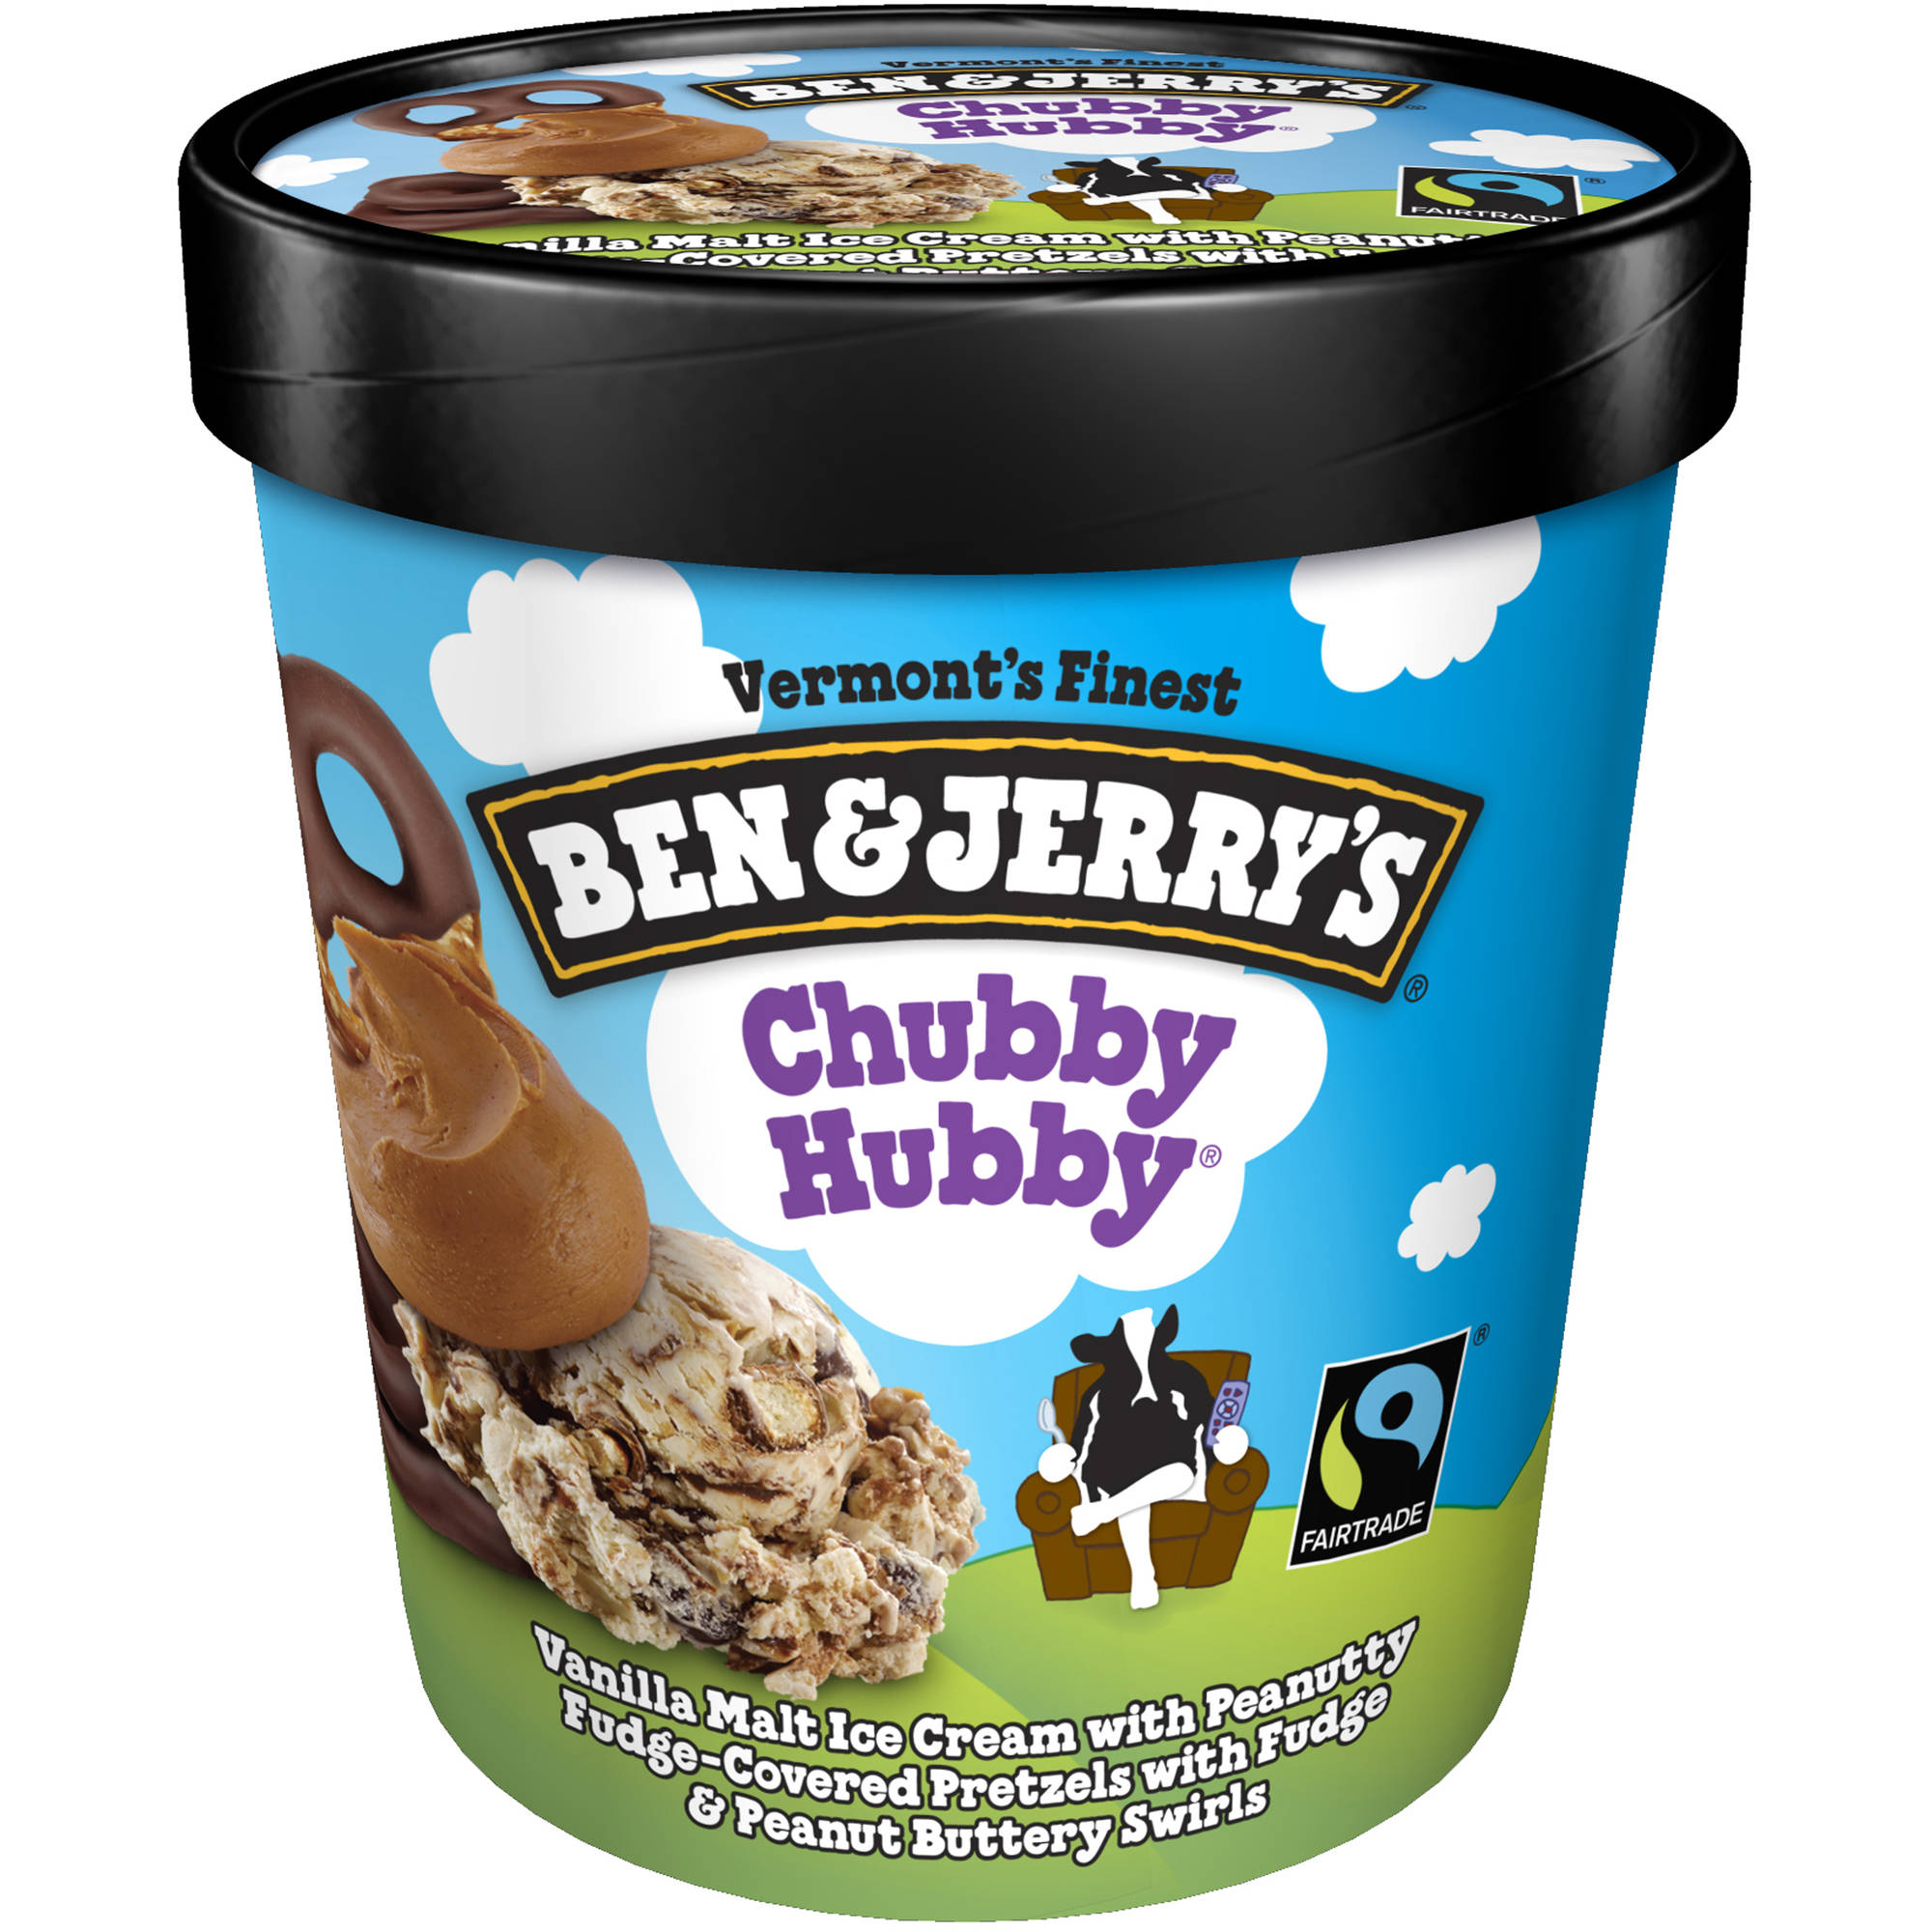 Ben and Jerry's Chubby Hubby. 